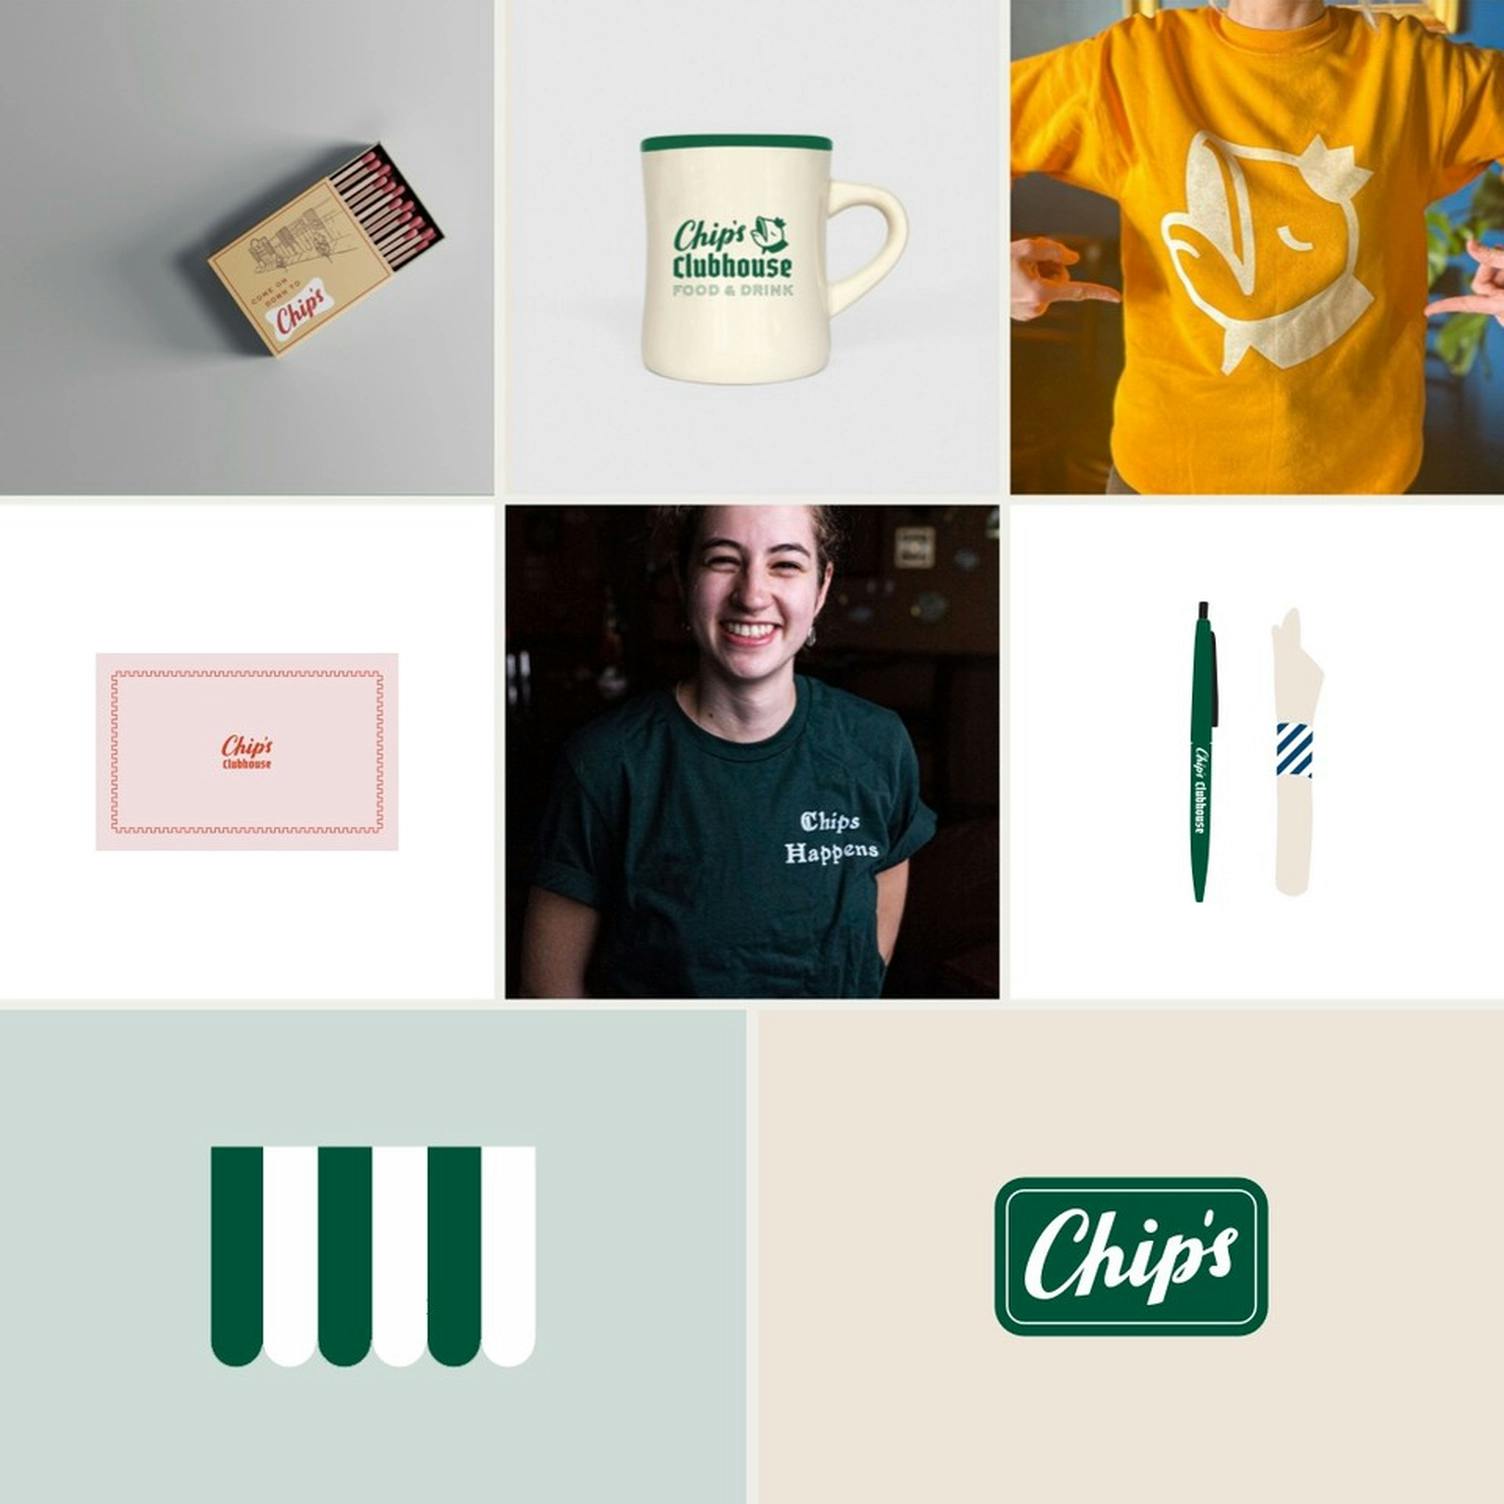 A collage of merch for Chip's Clubhouse